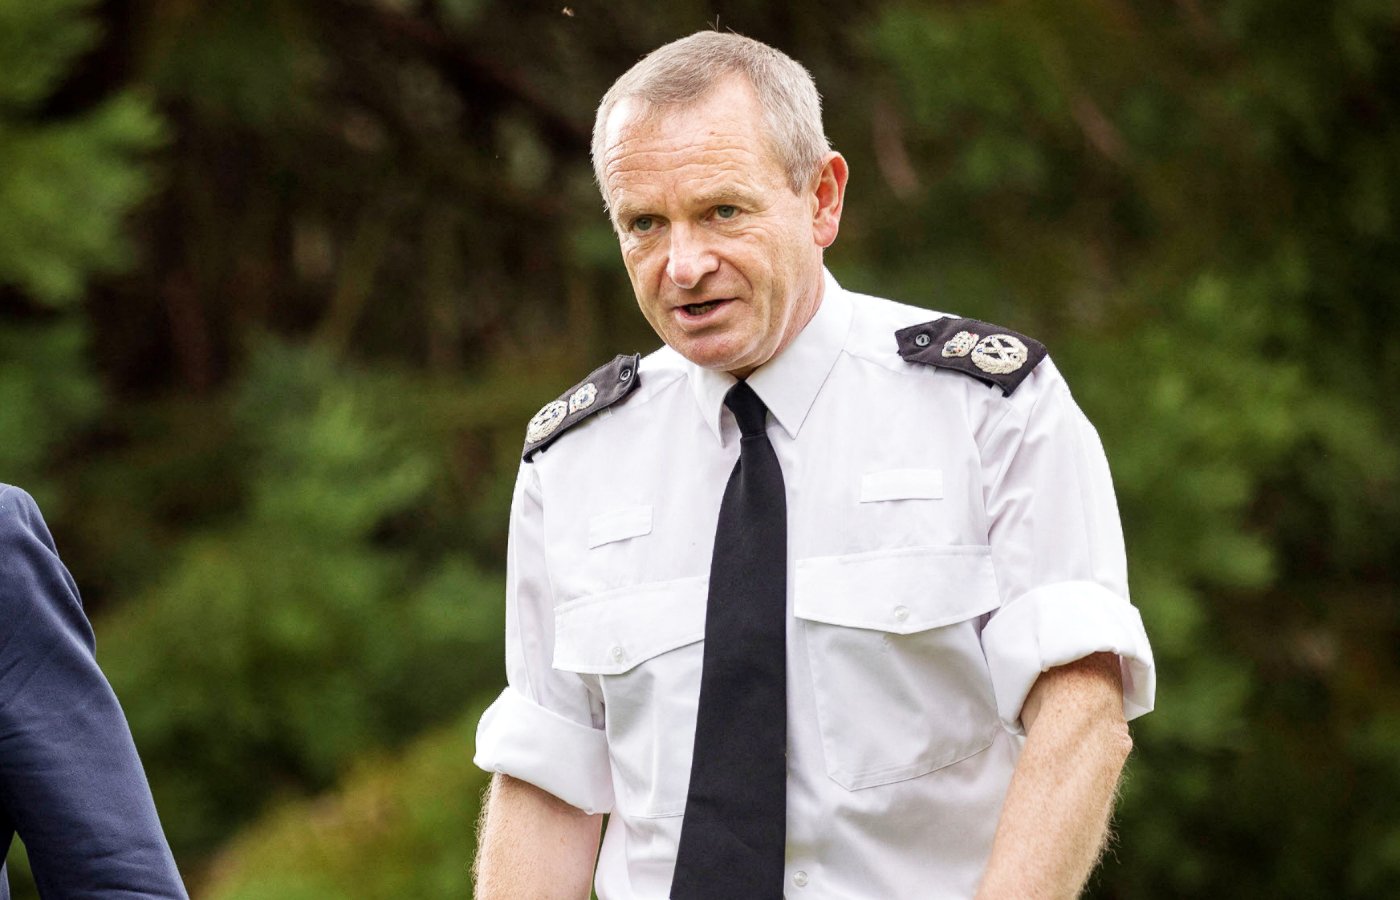 Sir Iain Livingstone made the comment during the meeting of the Scottish Police Authority on Thursday